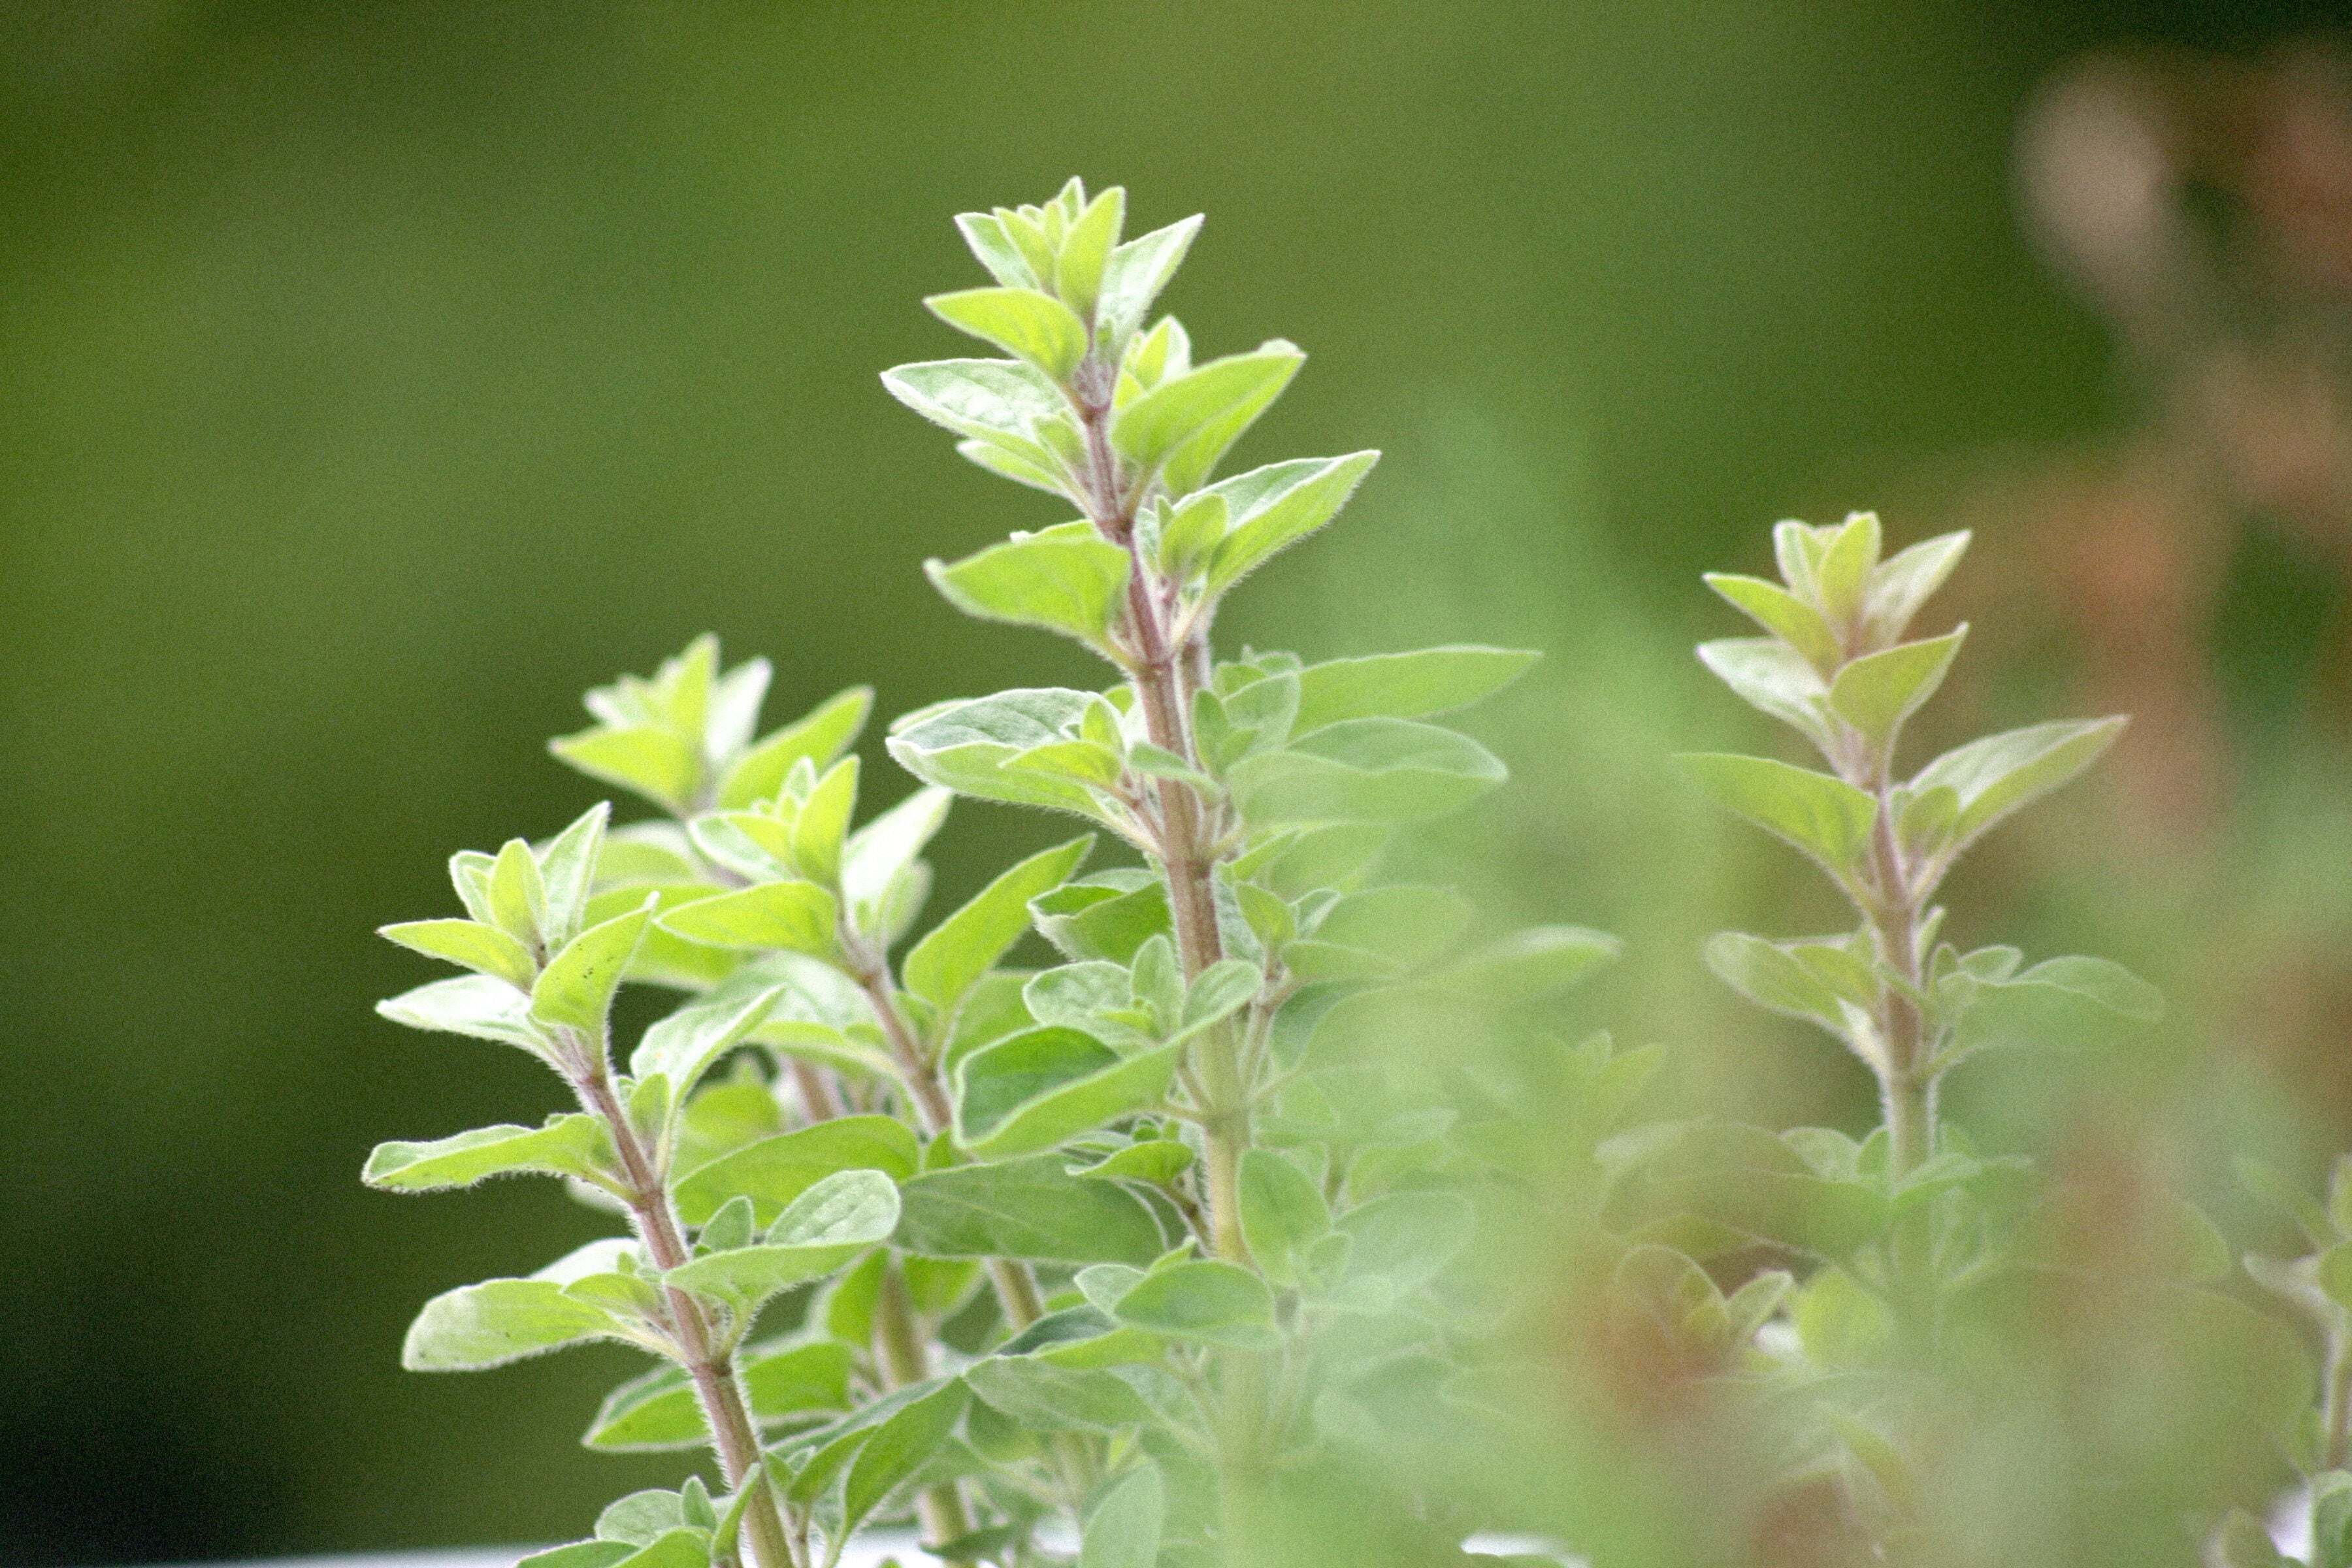 A stock image of oregano plants, slightly blurred and out of focus